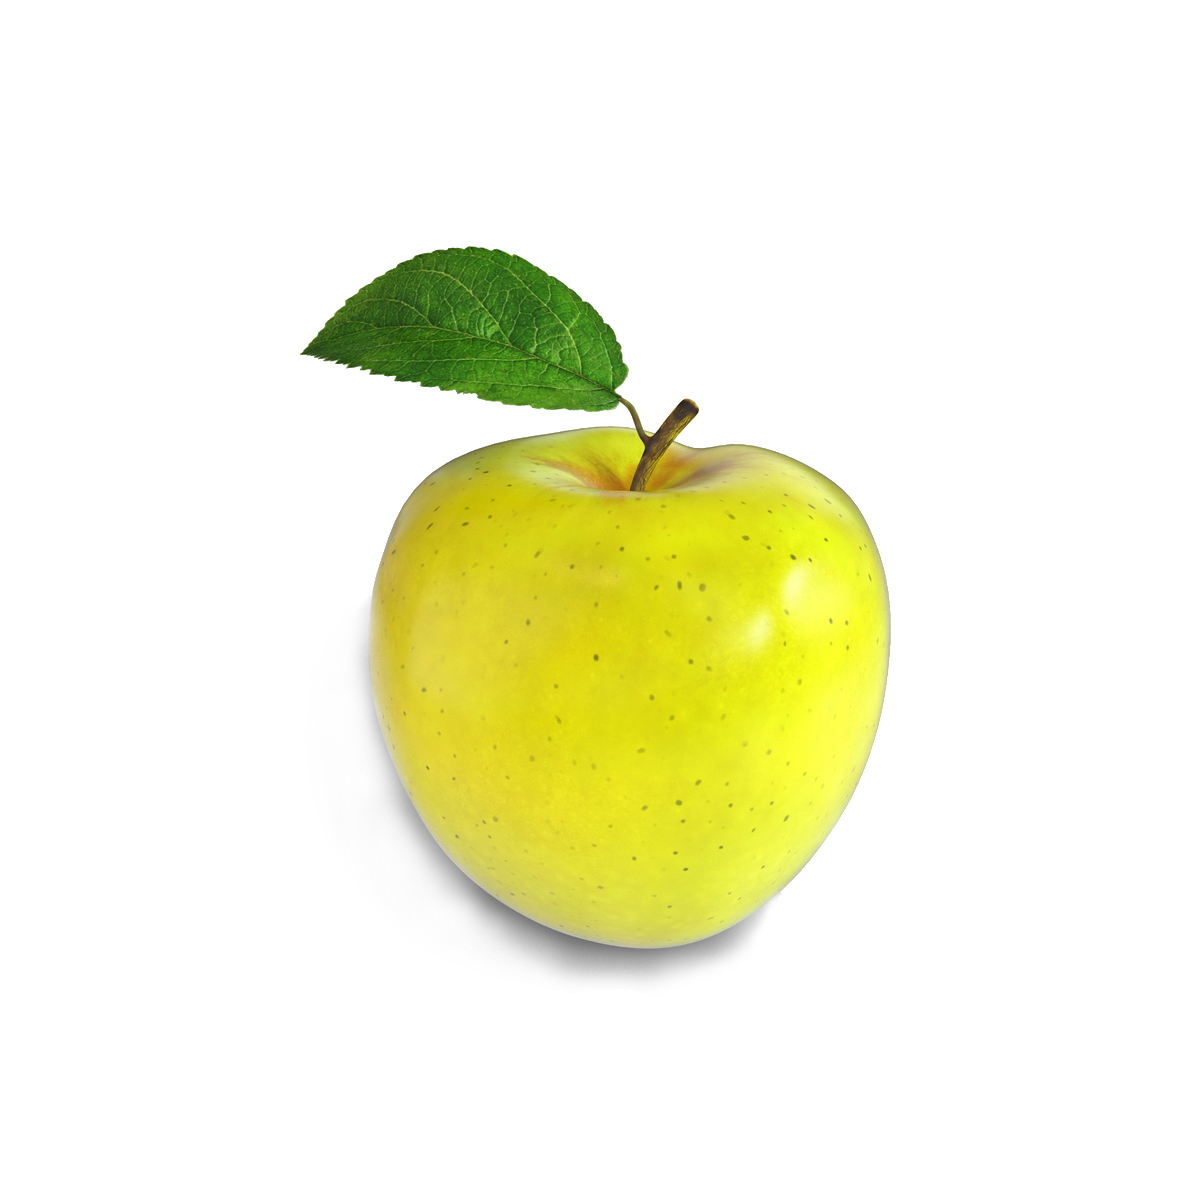 Yellow Apple: Yellow Apple 3d Model for Download - 17$ 